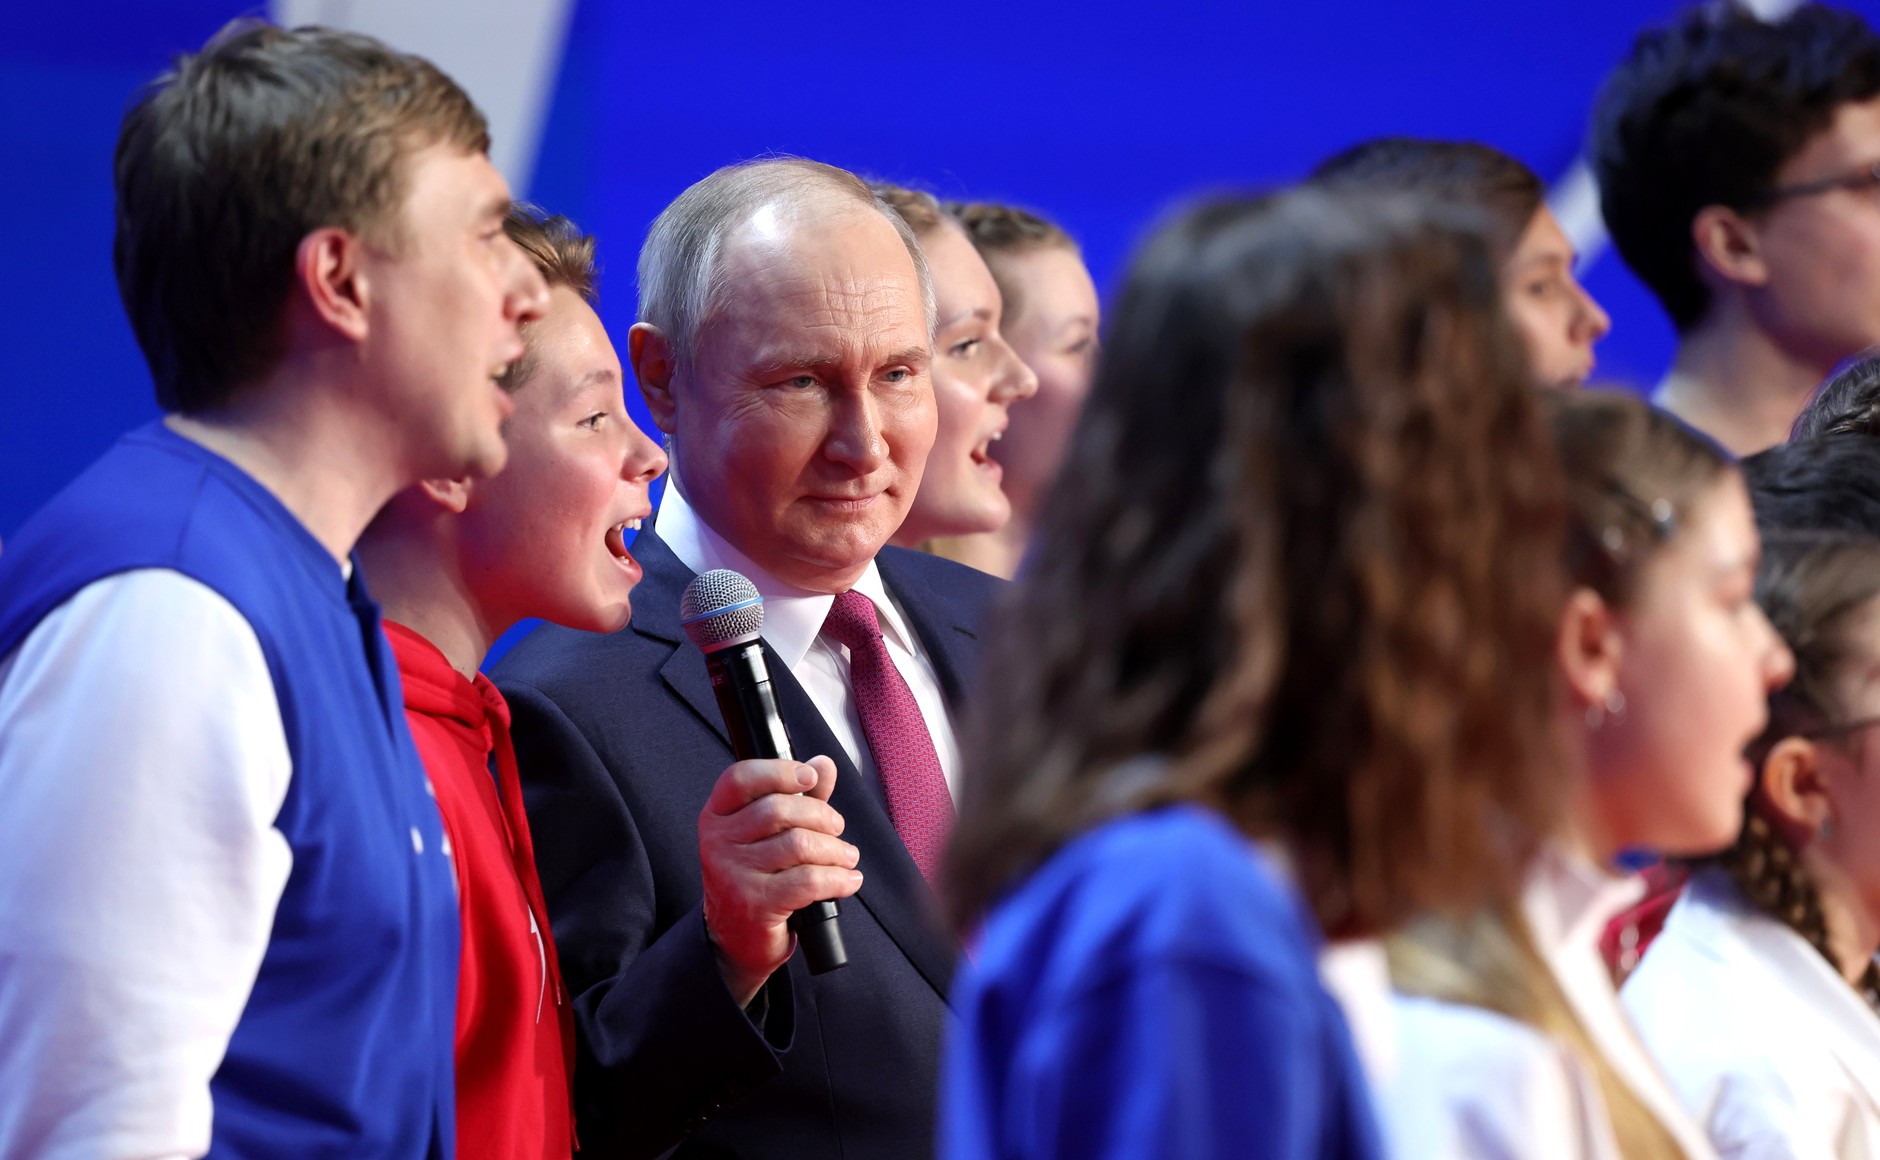 Putin and youth sing the hymn of Russia